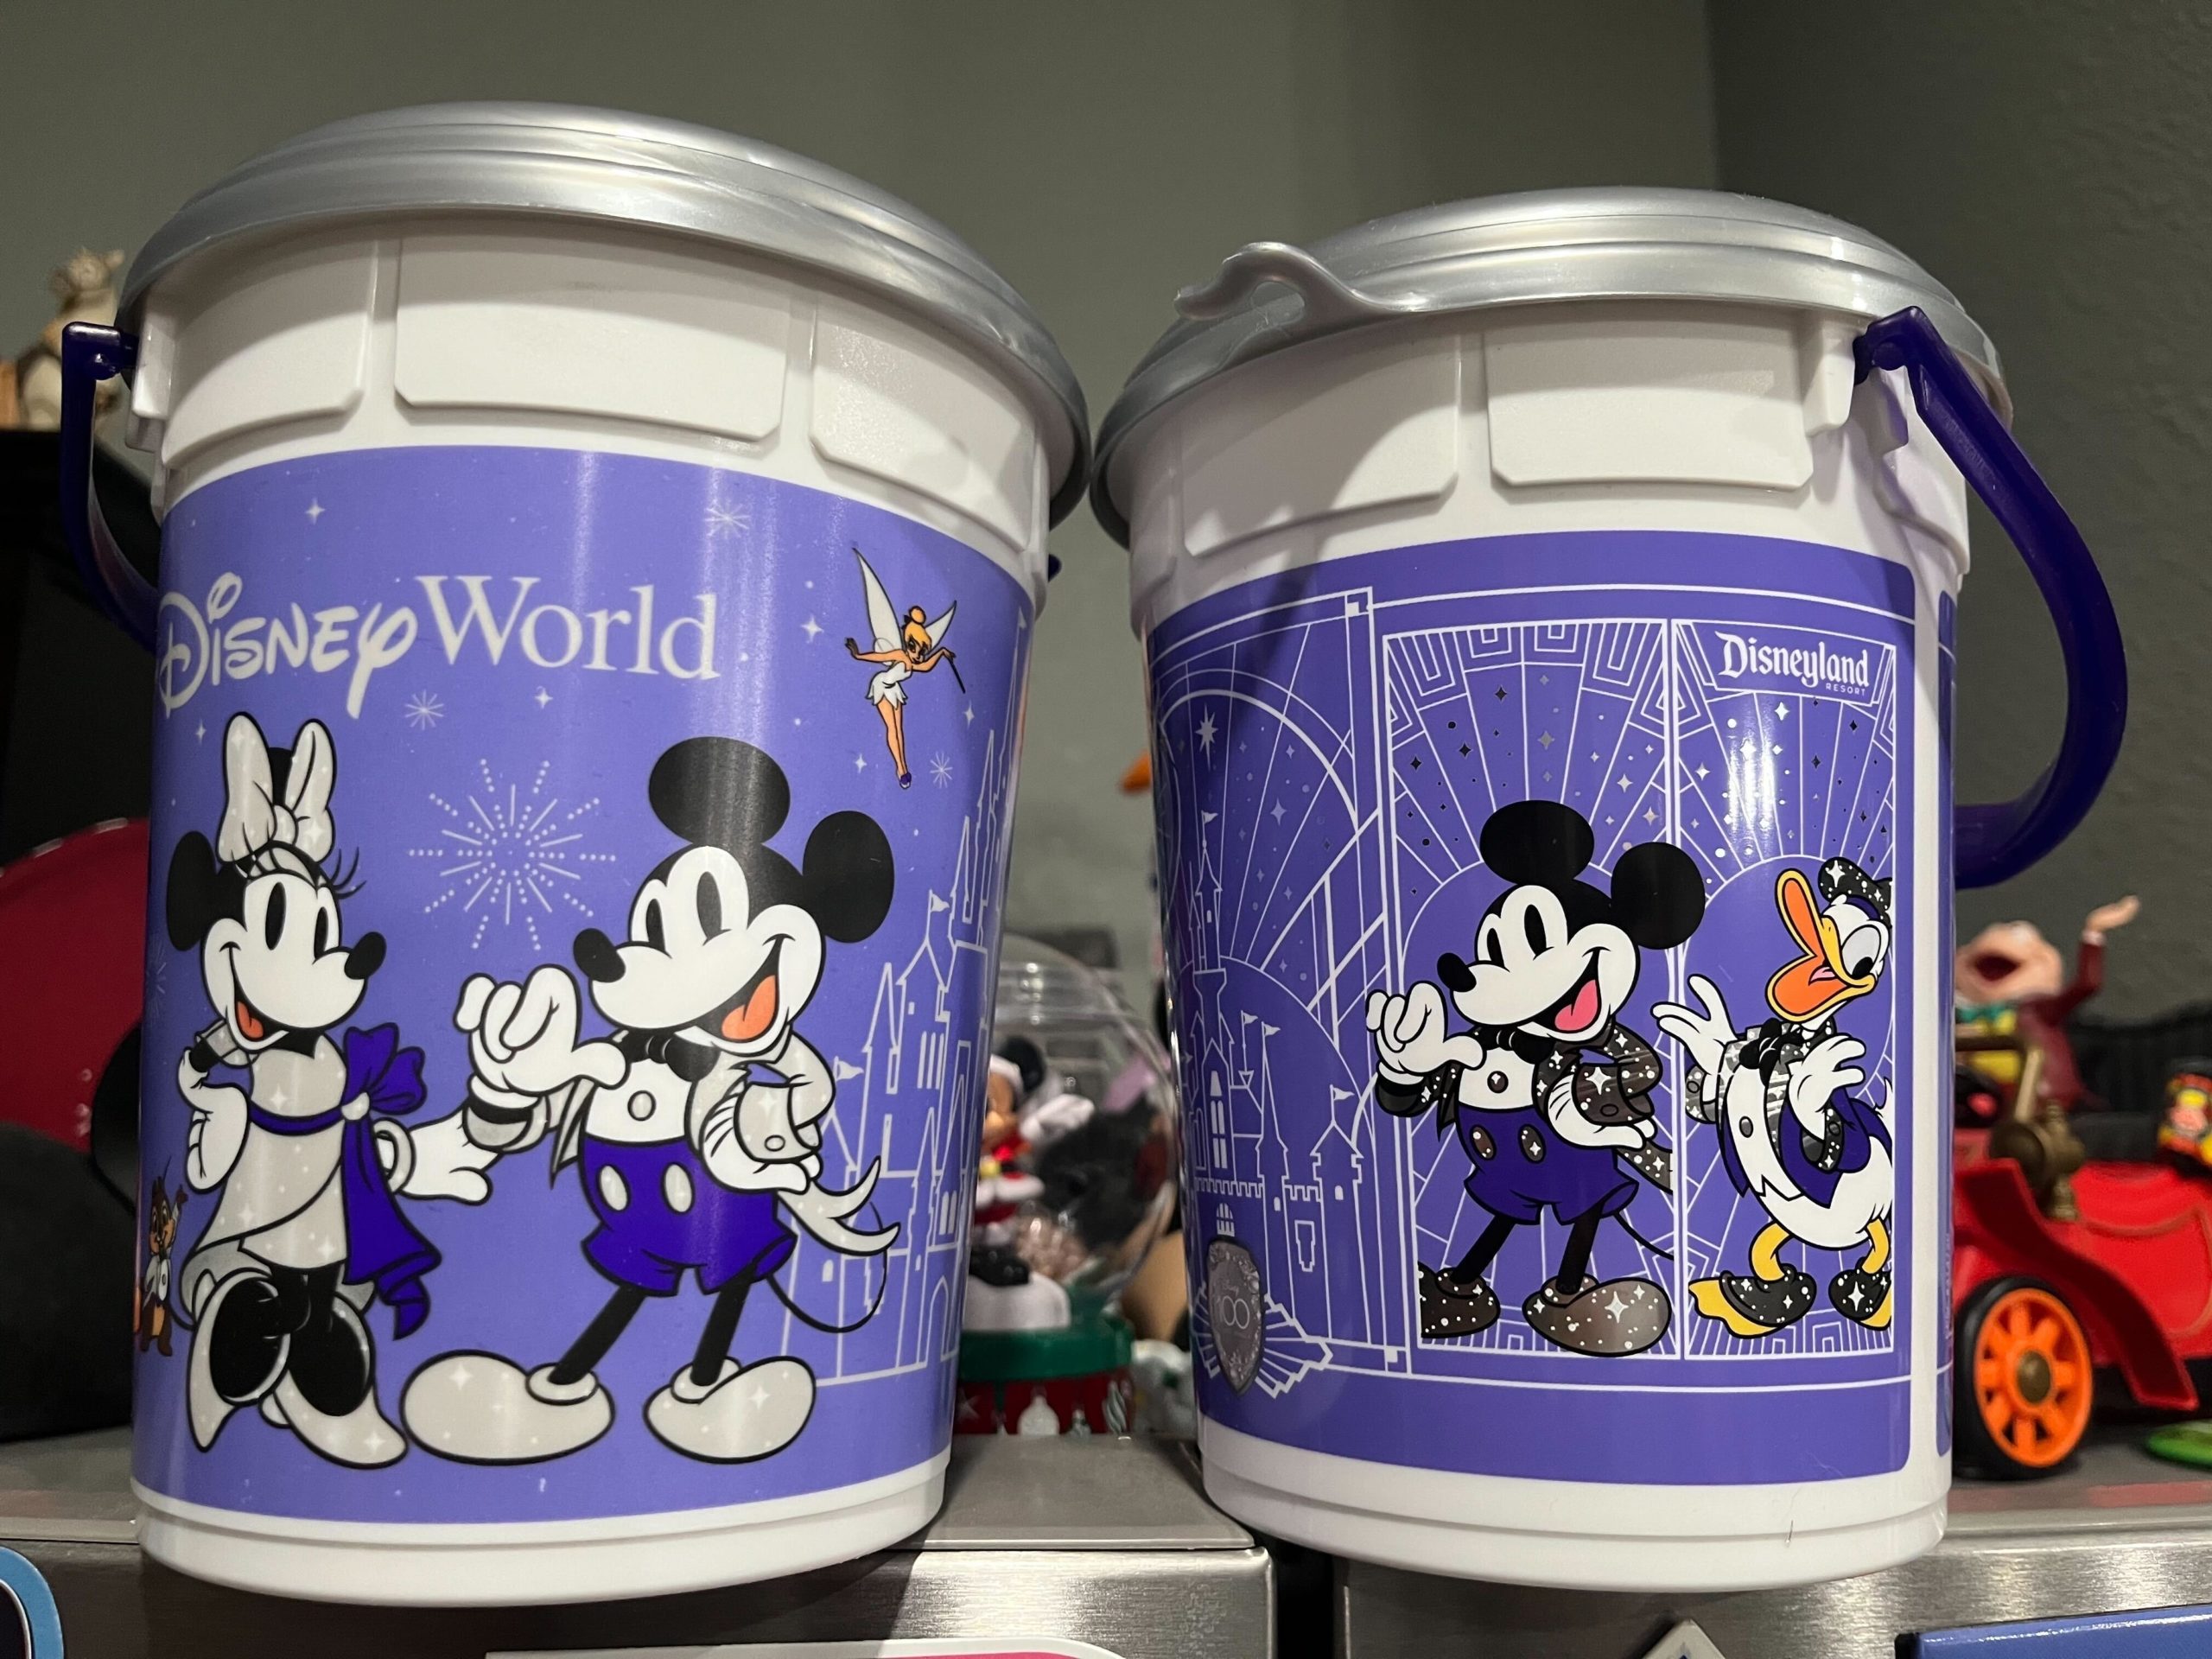 Refillable popcorn bucket is now available at Disney World 